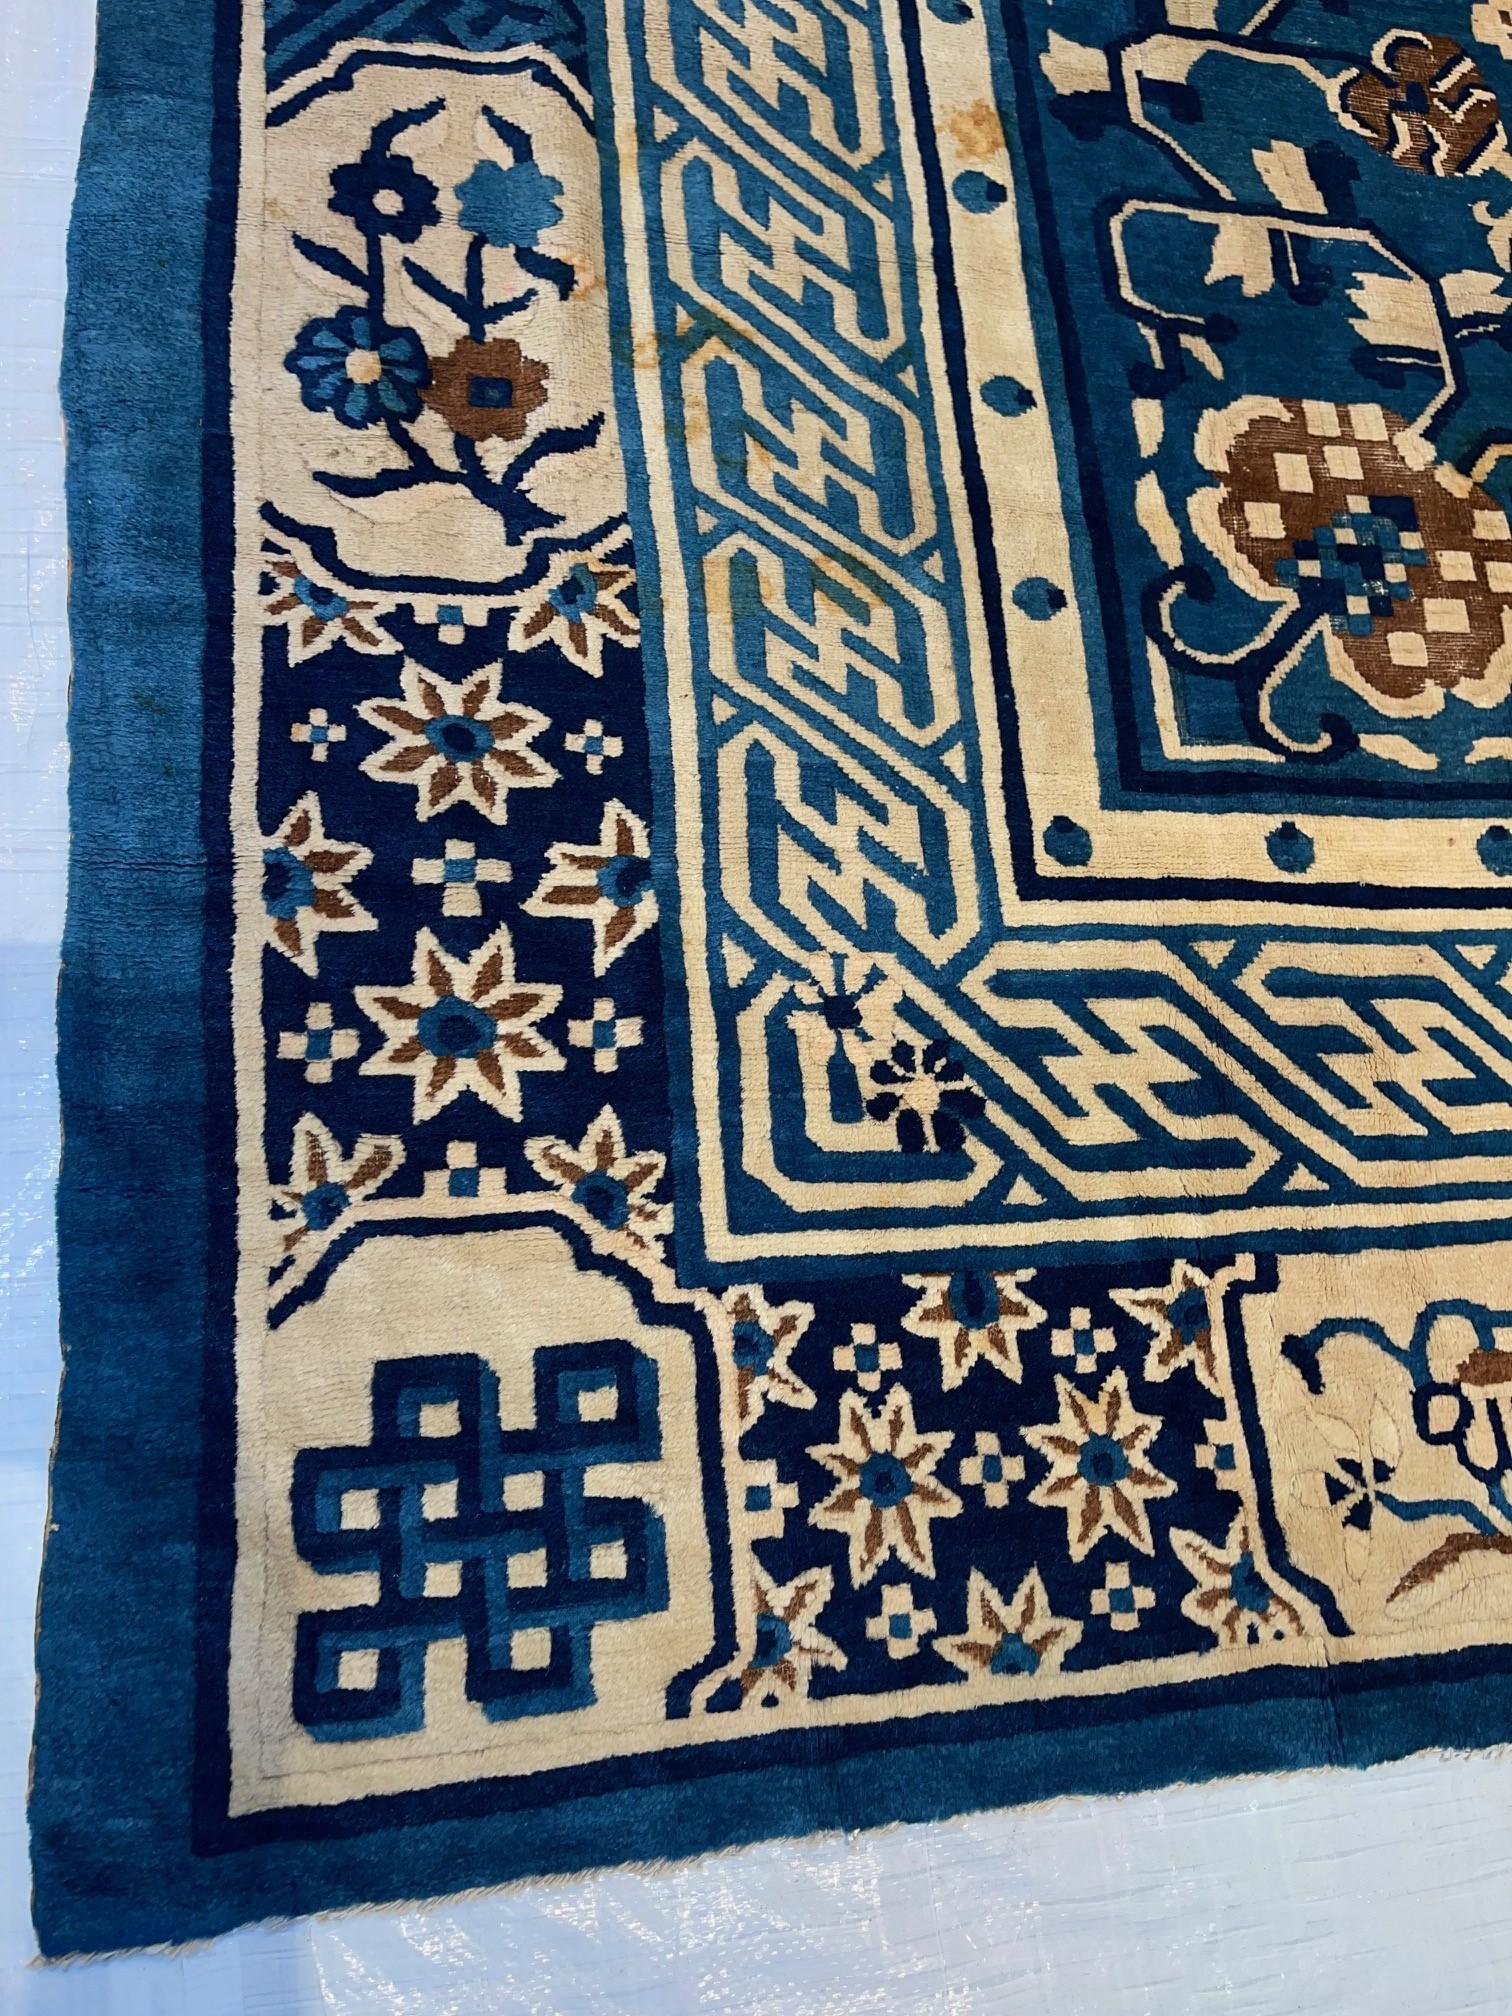 The Older Antique Chinese Rugs, as opposed to most other productions of Chinese goods, were woven almost exclusively for internal consumption. Since they were mostly sheltered from European and Western influences, this offers us the reason why these